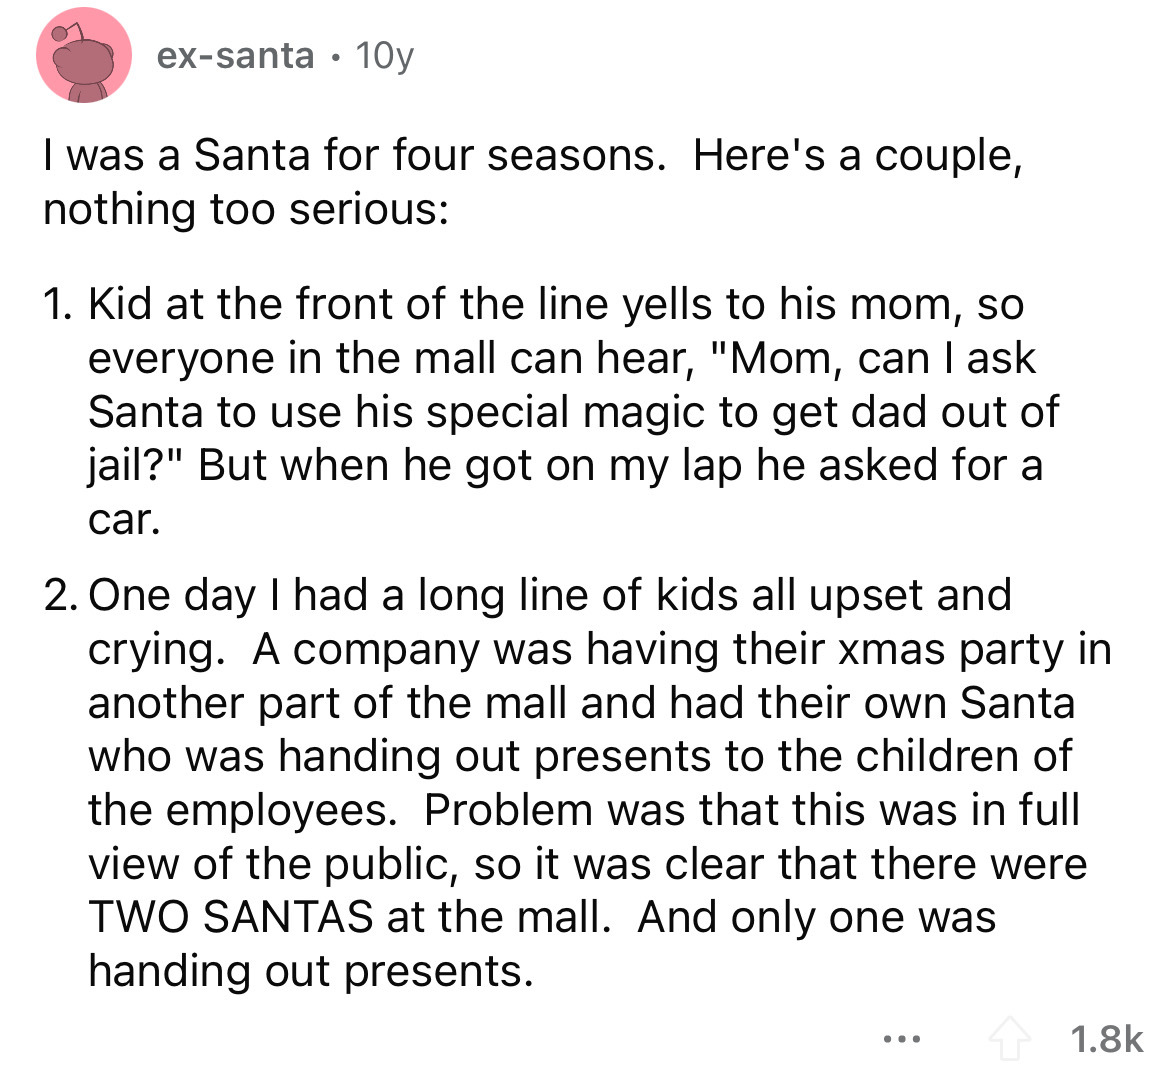 angle - exsanta 10y I was a Santa for four seasons. Here's a couple, nothing too serious 1. Kid at the front of the line yells to his mom, so everyone in the mall can hear, "Mom, can I ask Santa to use his special magic to get dad out of jail?" But when h